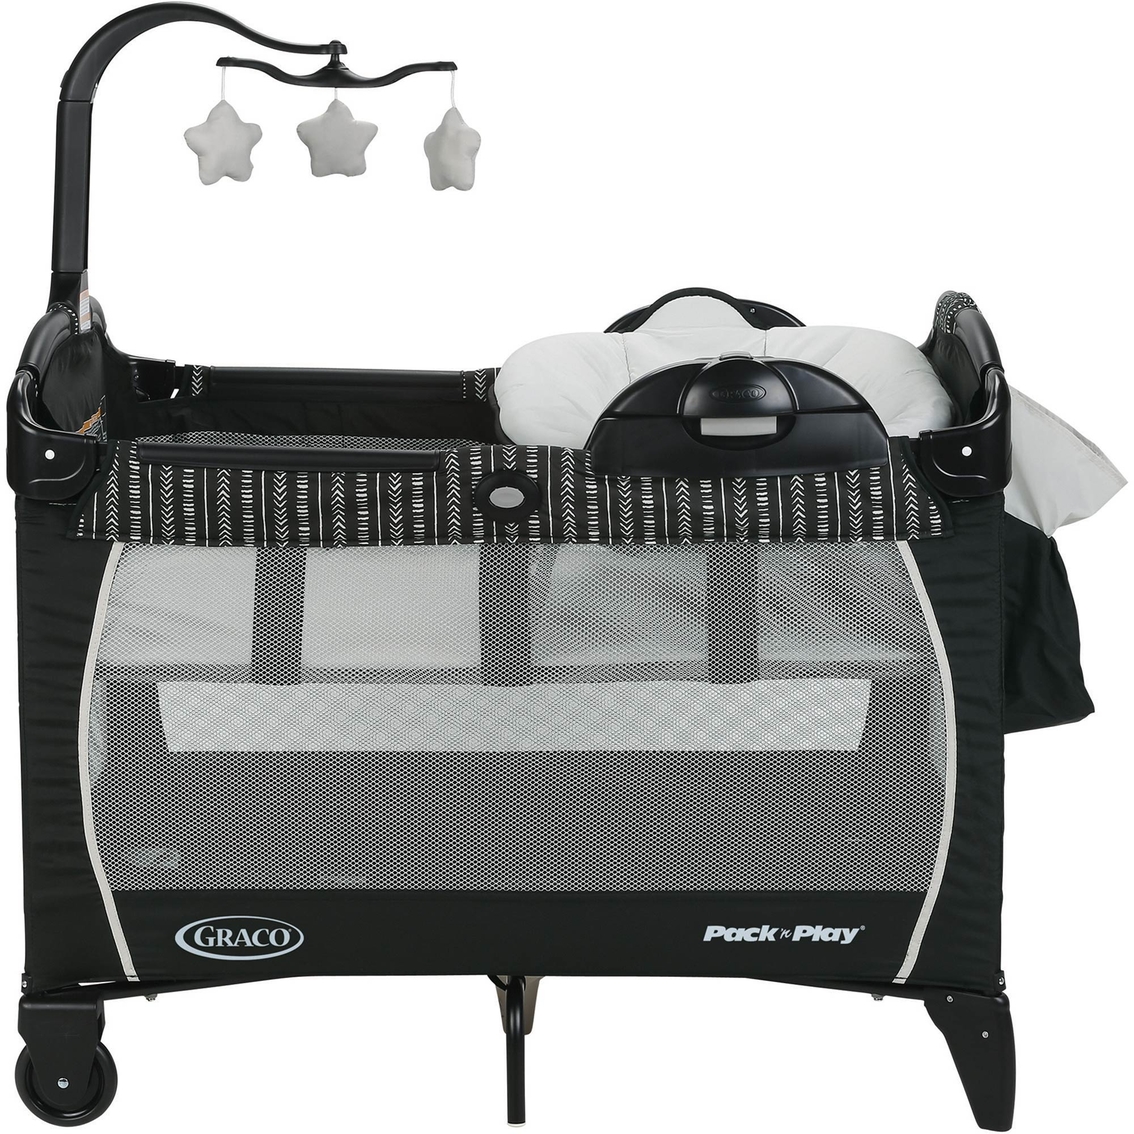 Graco Pack 'n Play Portable Napper and Changer Playard - Image 2 of 4